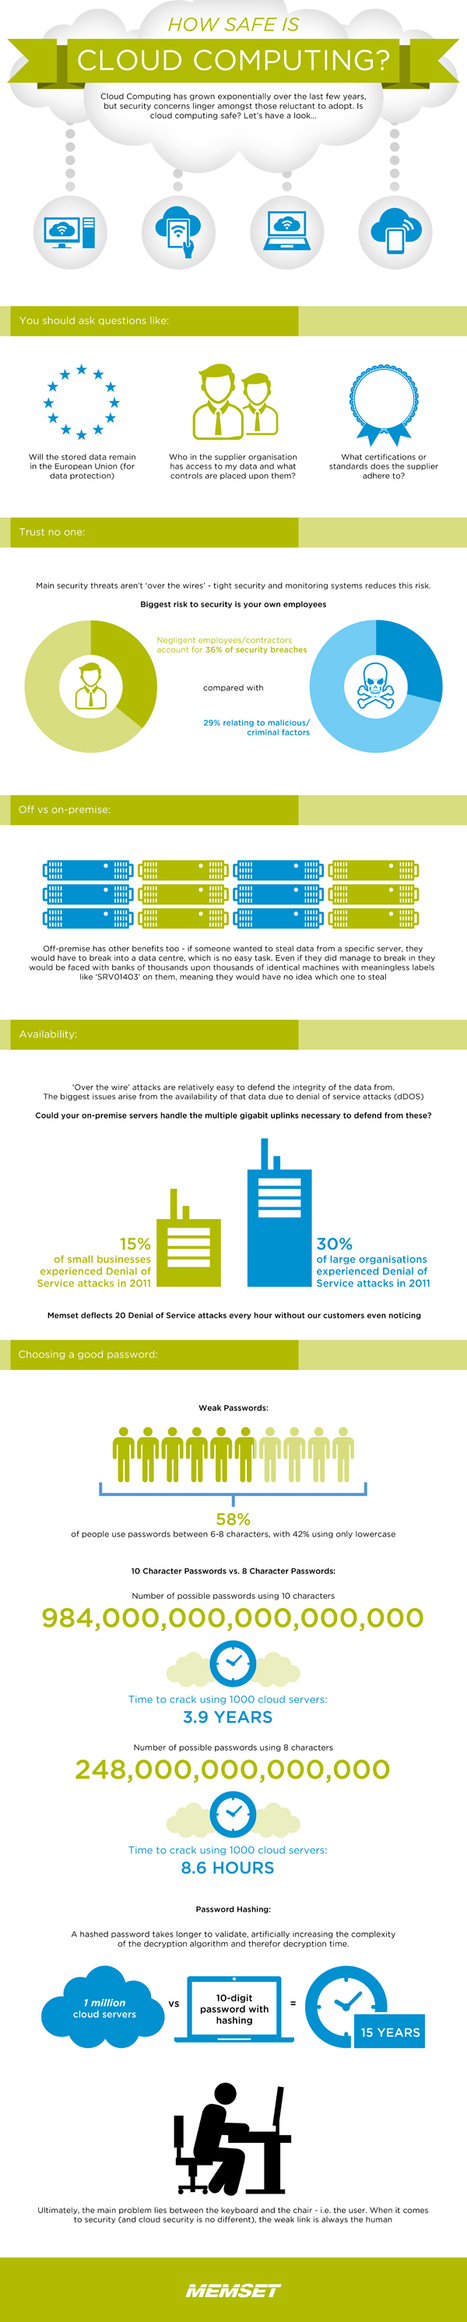 INFOGRAPHIC: How Safe is The Cloud? | Business Improvement and Social media | Scoop.it